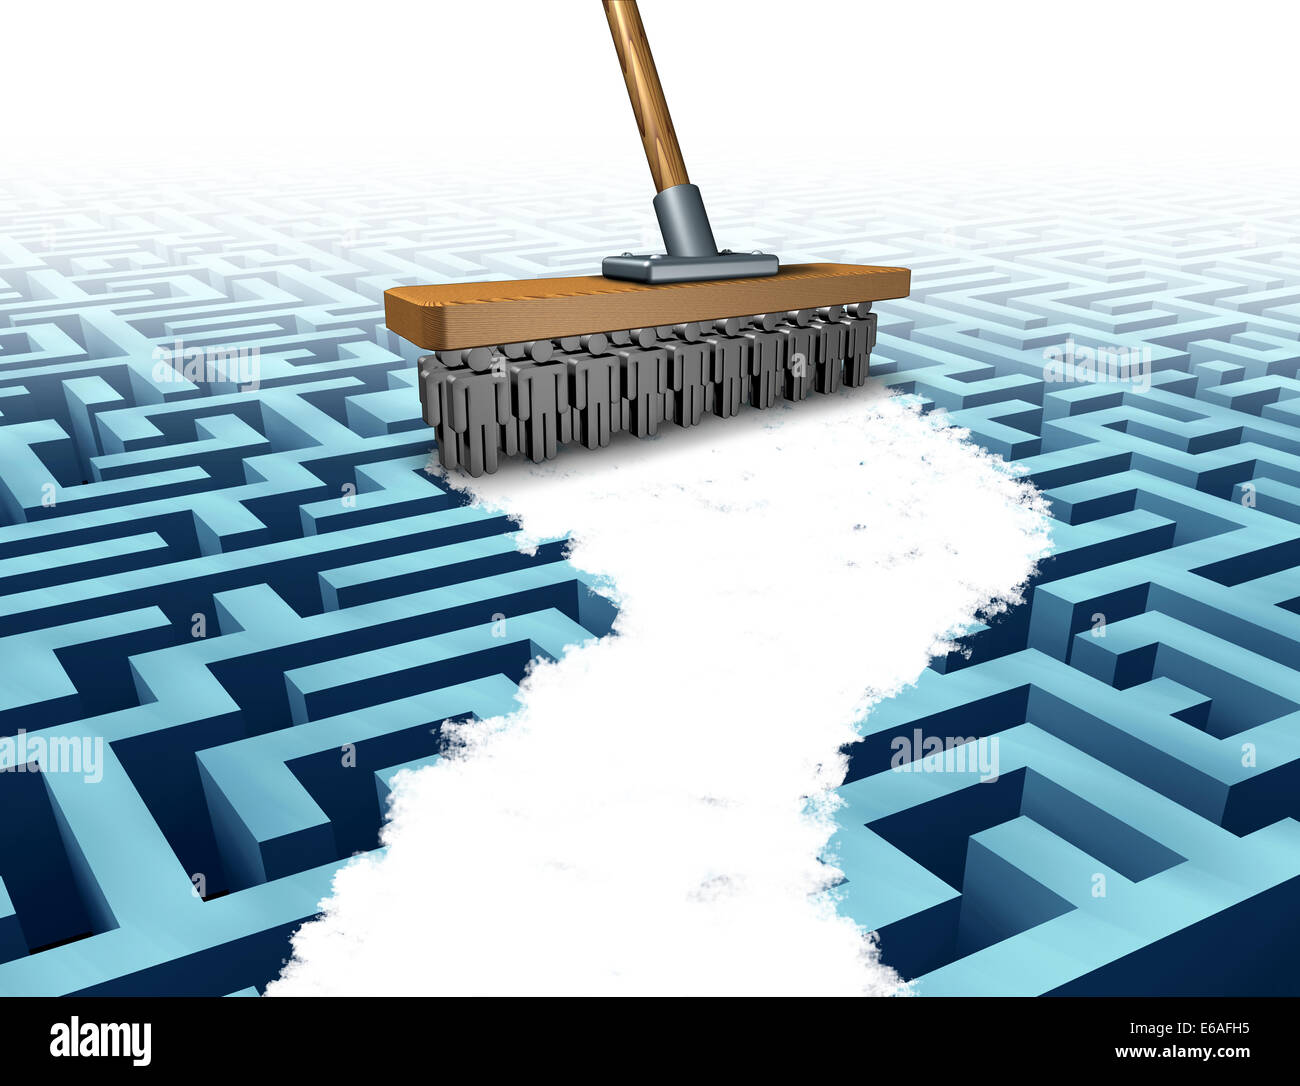 Teamwork solution and company support business concept as a metaphor of a broom with the cleaning bristles made from people icons clearing a path through a complicated maze as a symbol working together for team success. Stock Photo